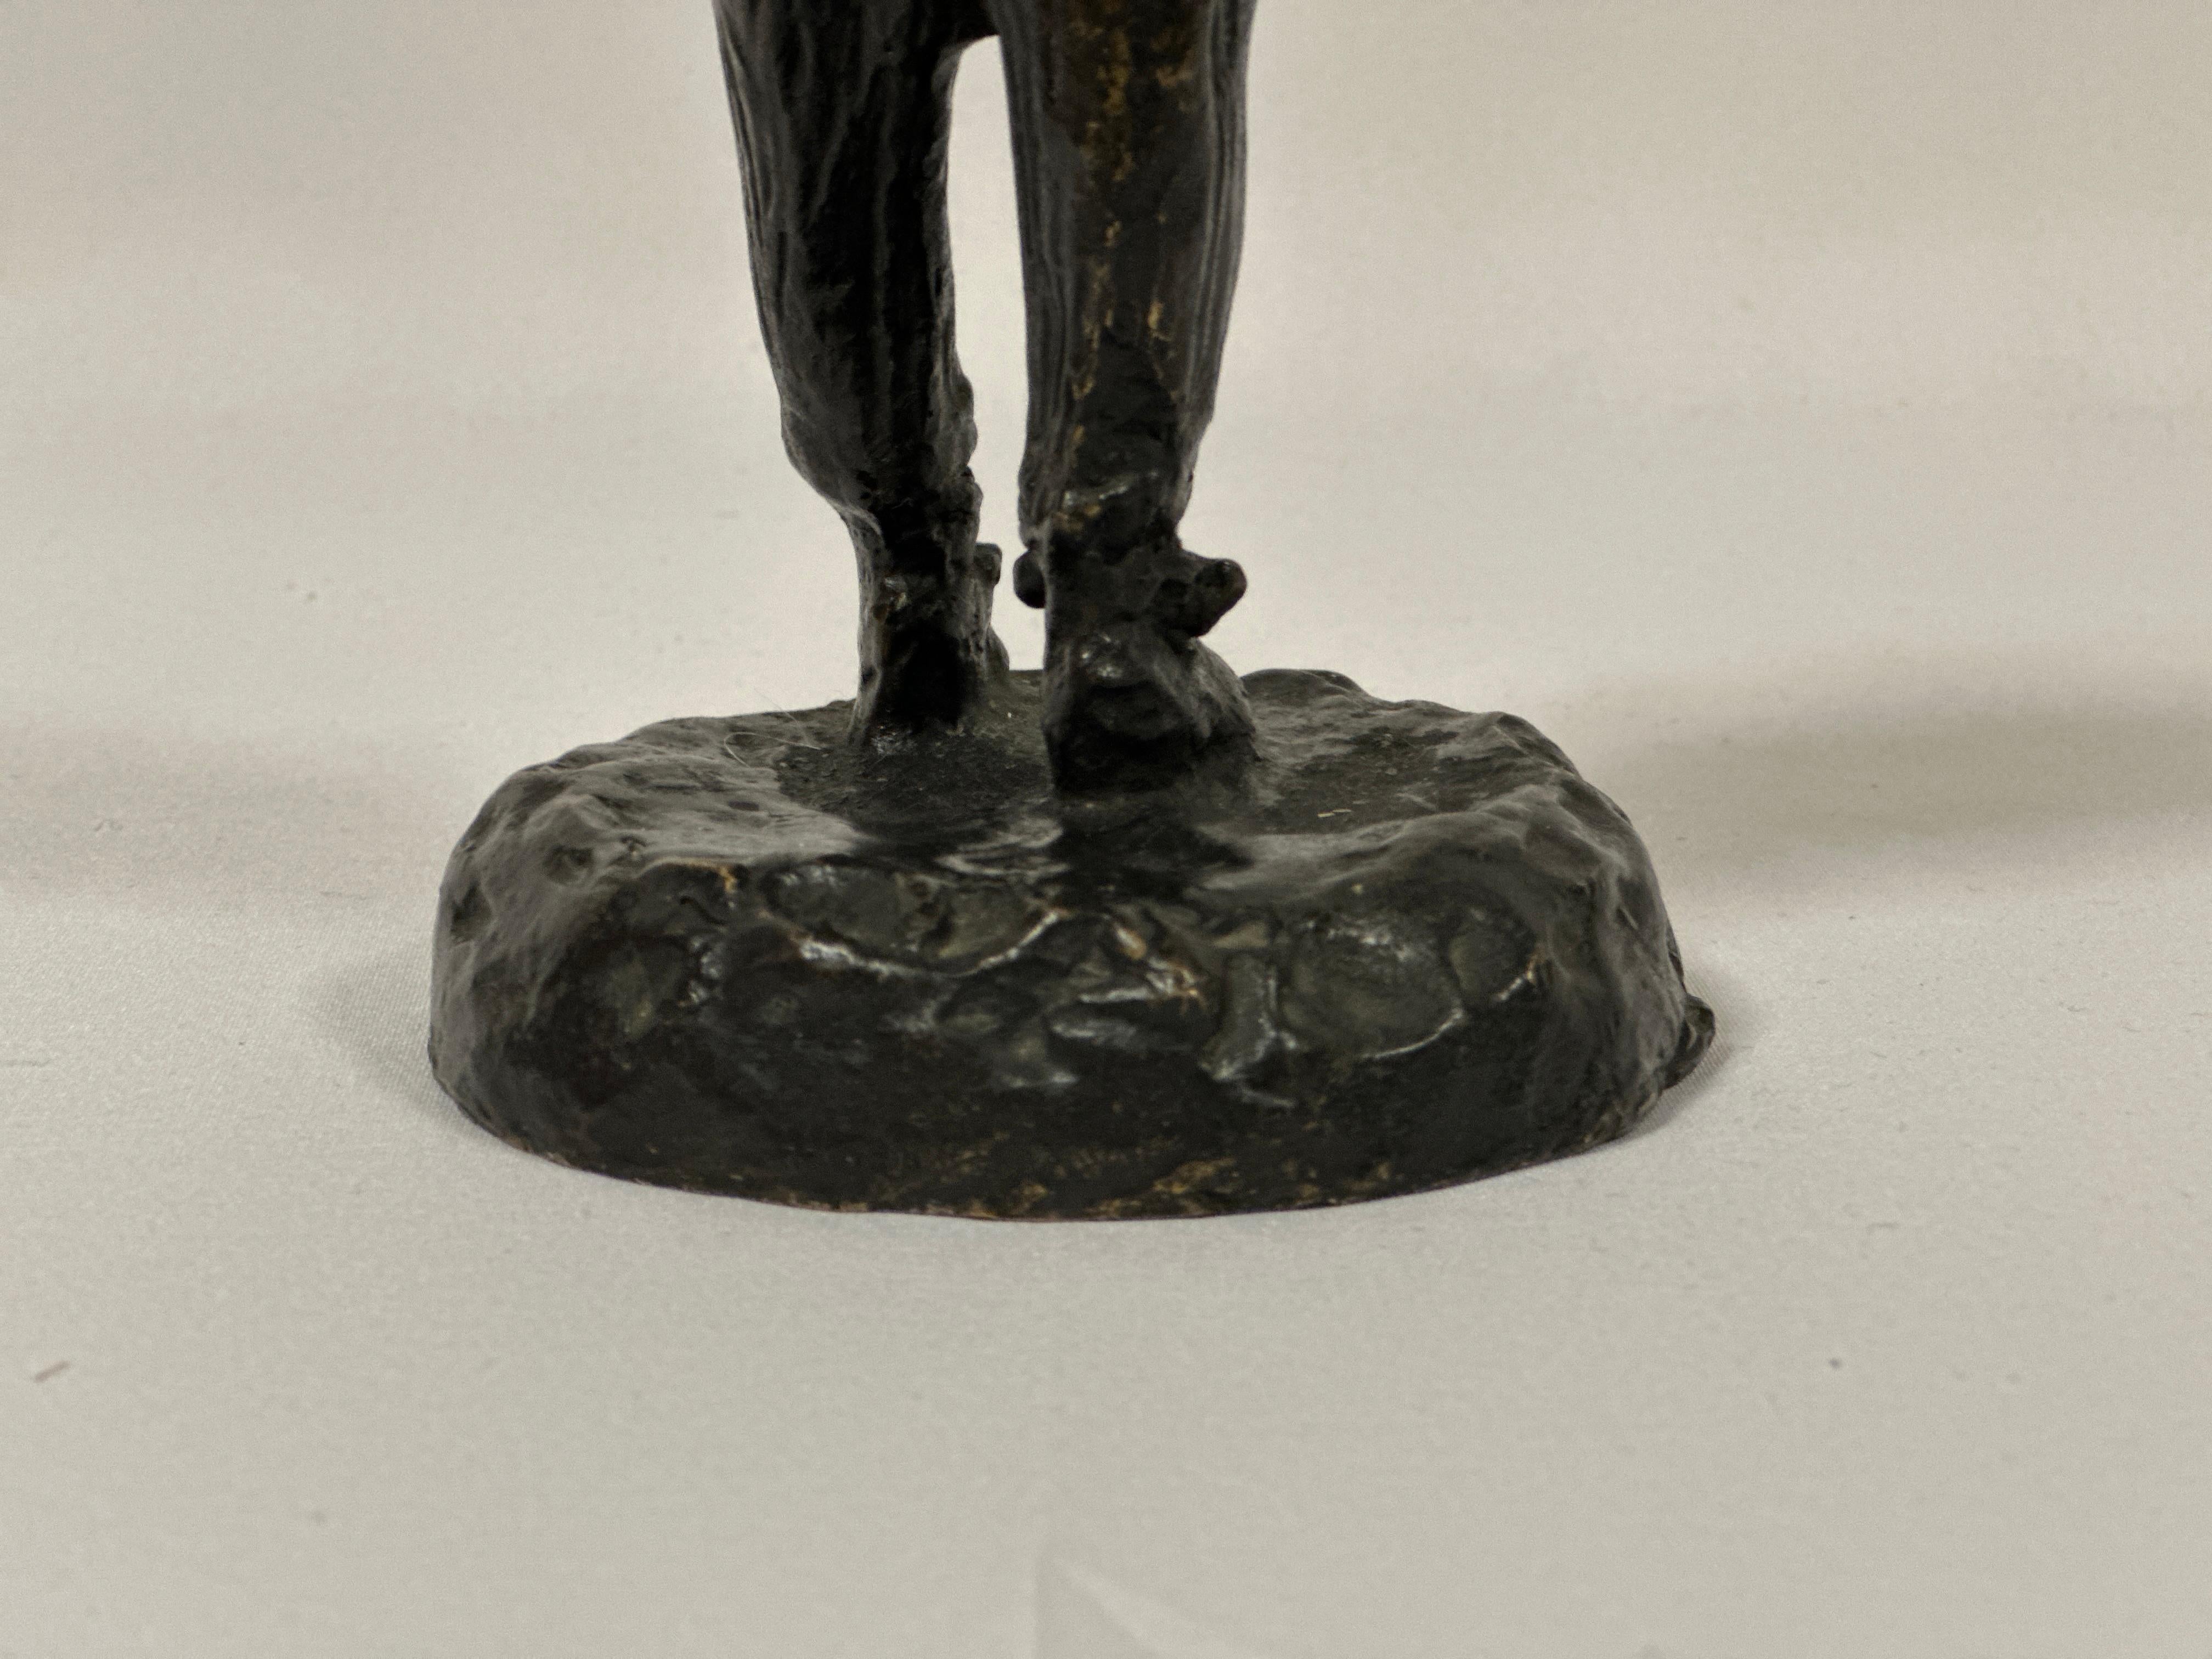 ETHEL MYERS (1881-1960)
The Gambler, Joe Johnson, n.d.
bronze with brown patina
9 inches (22.9 cm.) high
Stamped with foundry mark (on the base):  ROMAN BRONZE WORKS NY

Mae Ethel Klinck Myers (August 23, 1881 - May 24, 1960), better known as Ethel